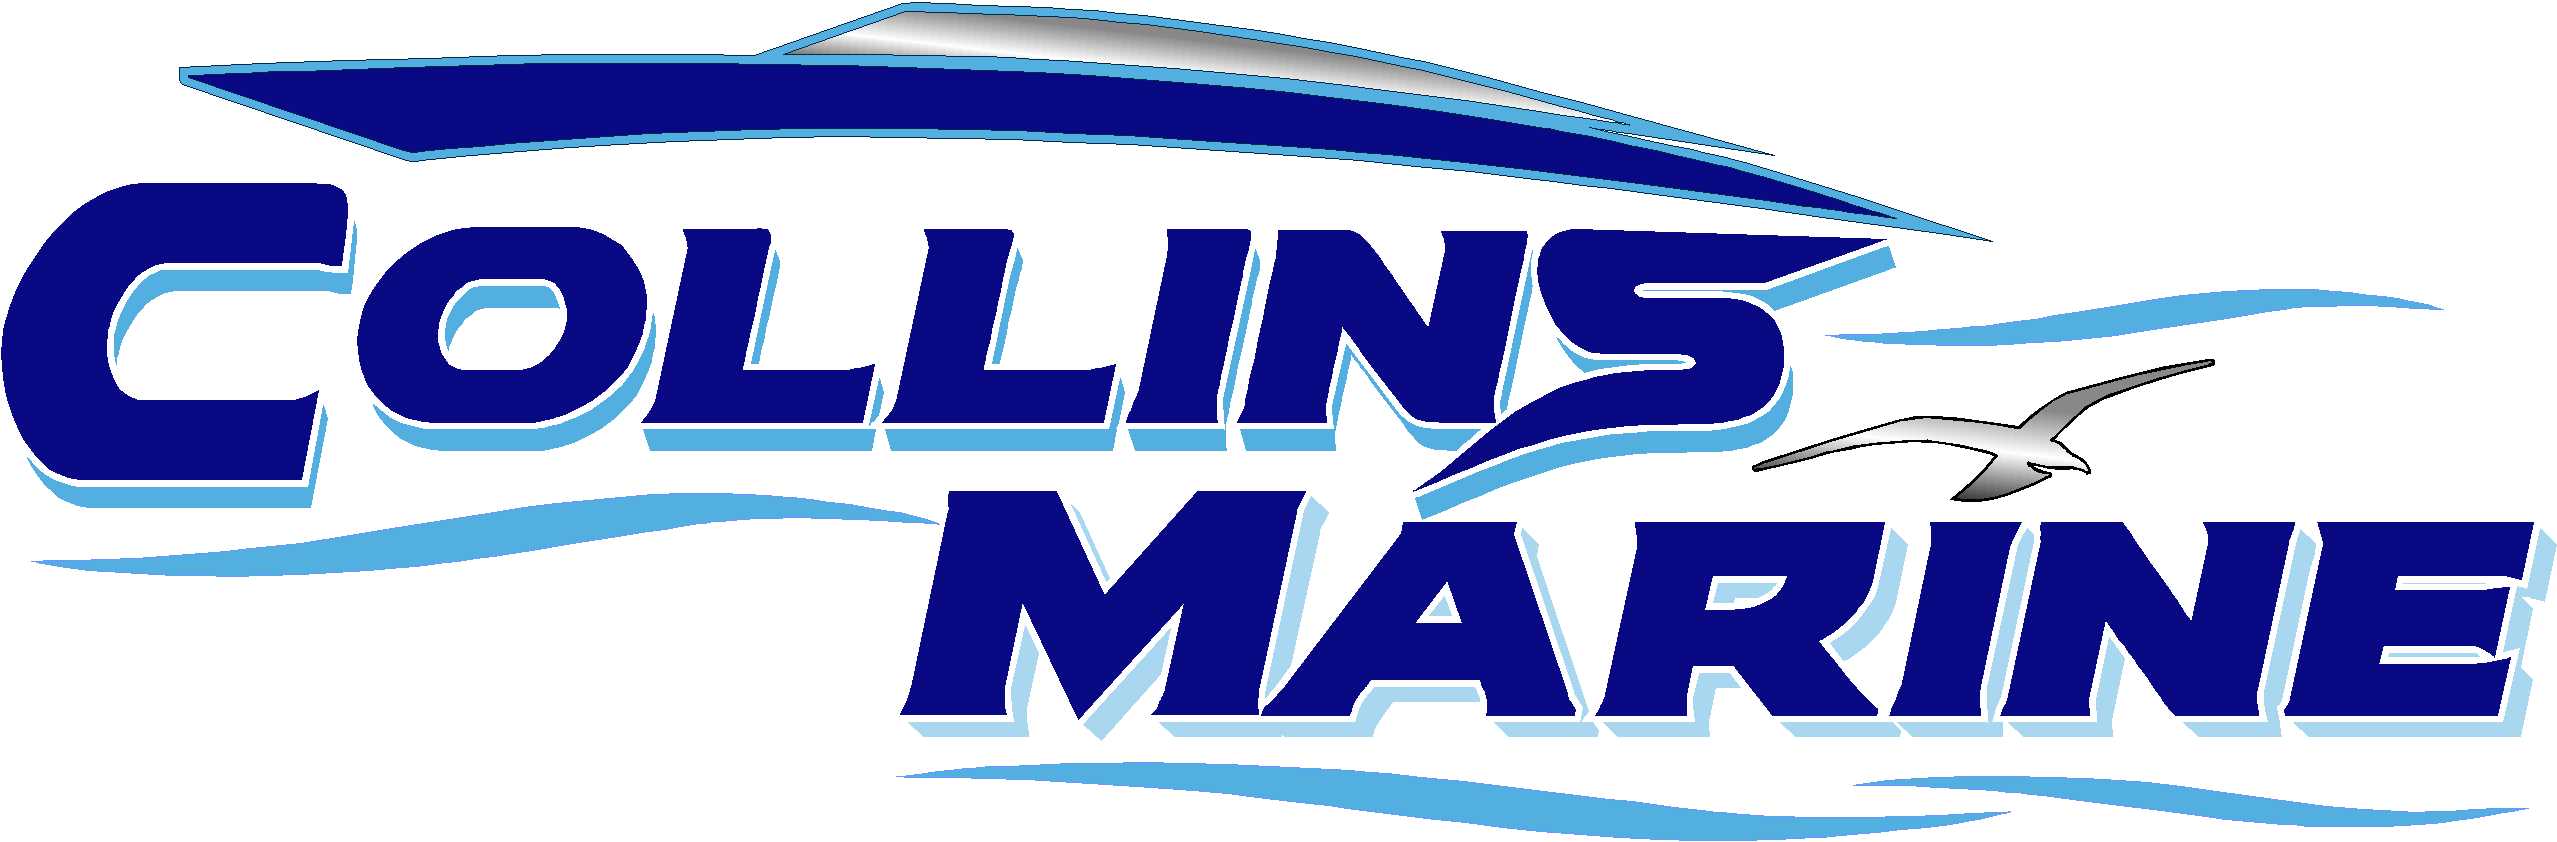 collins logo1 outlined (3)